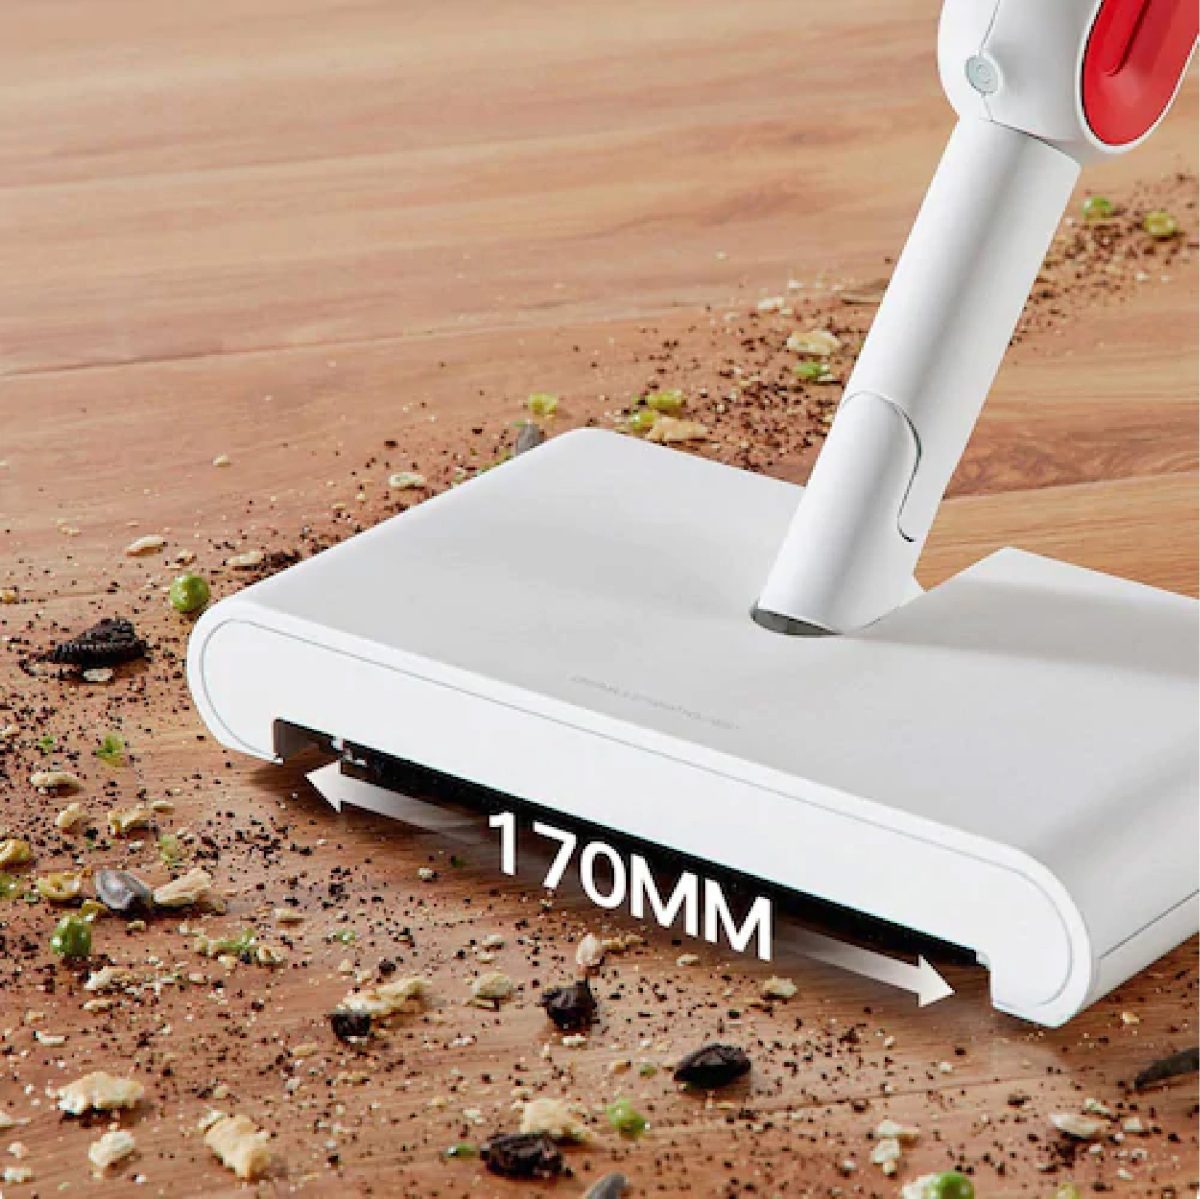 Delmar 05 Xiaomi &Lt;H1&Gt;Deerma Dem-Tb900 Sweep Mop With Sweeping / Cleaning Function&Lt;/H1&Gt; Easy To Operate, Easy To Push, Long-Distance Spray Can Make The Ground Slightly Damp, High Cleaning Efficiency. Front Roller Brush Spiral Machine, I.e. Pushed Forward Rotation Can Drive The Roller Brush, The Floor Dust Rubbish Swept Into The Dust Box, Dust And No Sweep Net. Soft Bristles Slender, Deep Ground Slit Sweep Out Dust, Clean The Inside And Outside. Deerma Deerma Dem-Tb900 Sweep Mop With Sweeping / Cleaning Function